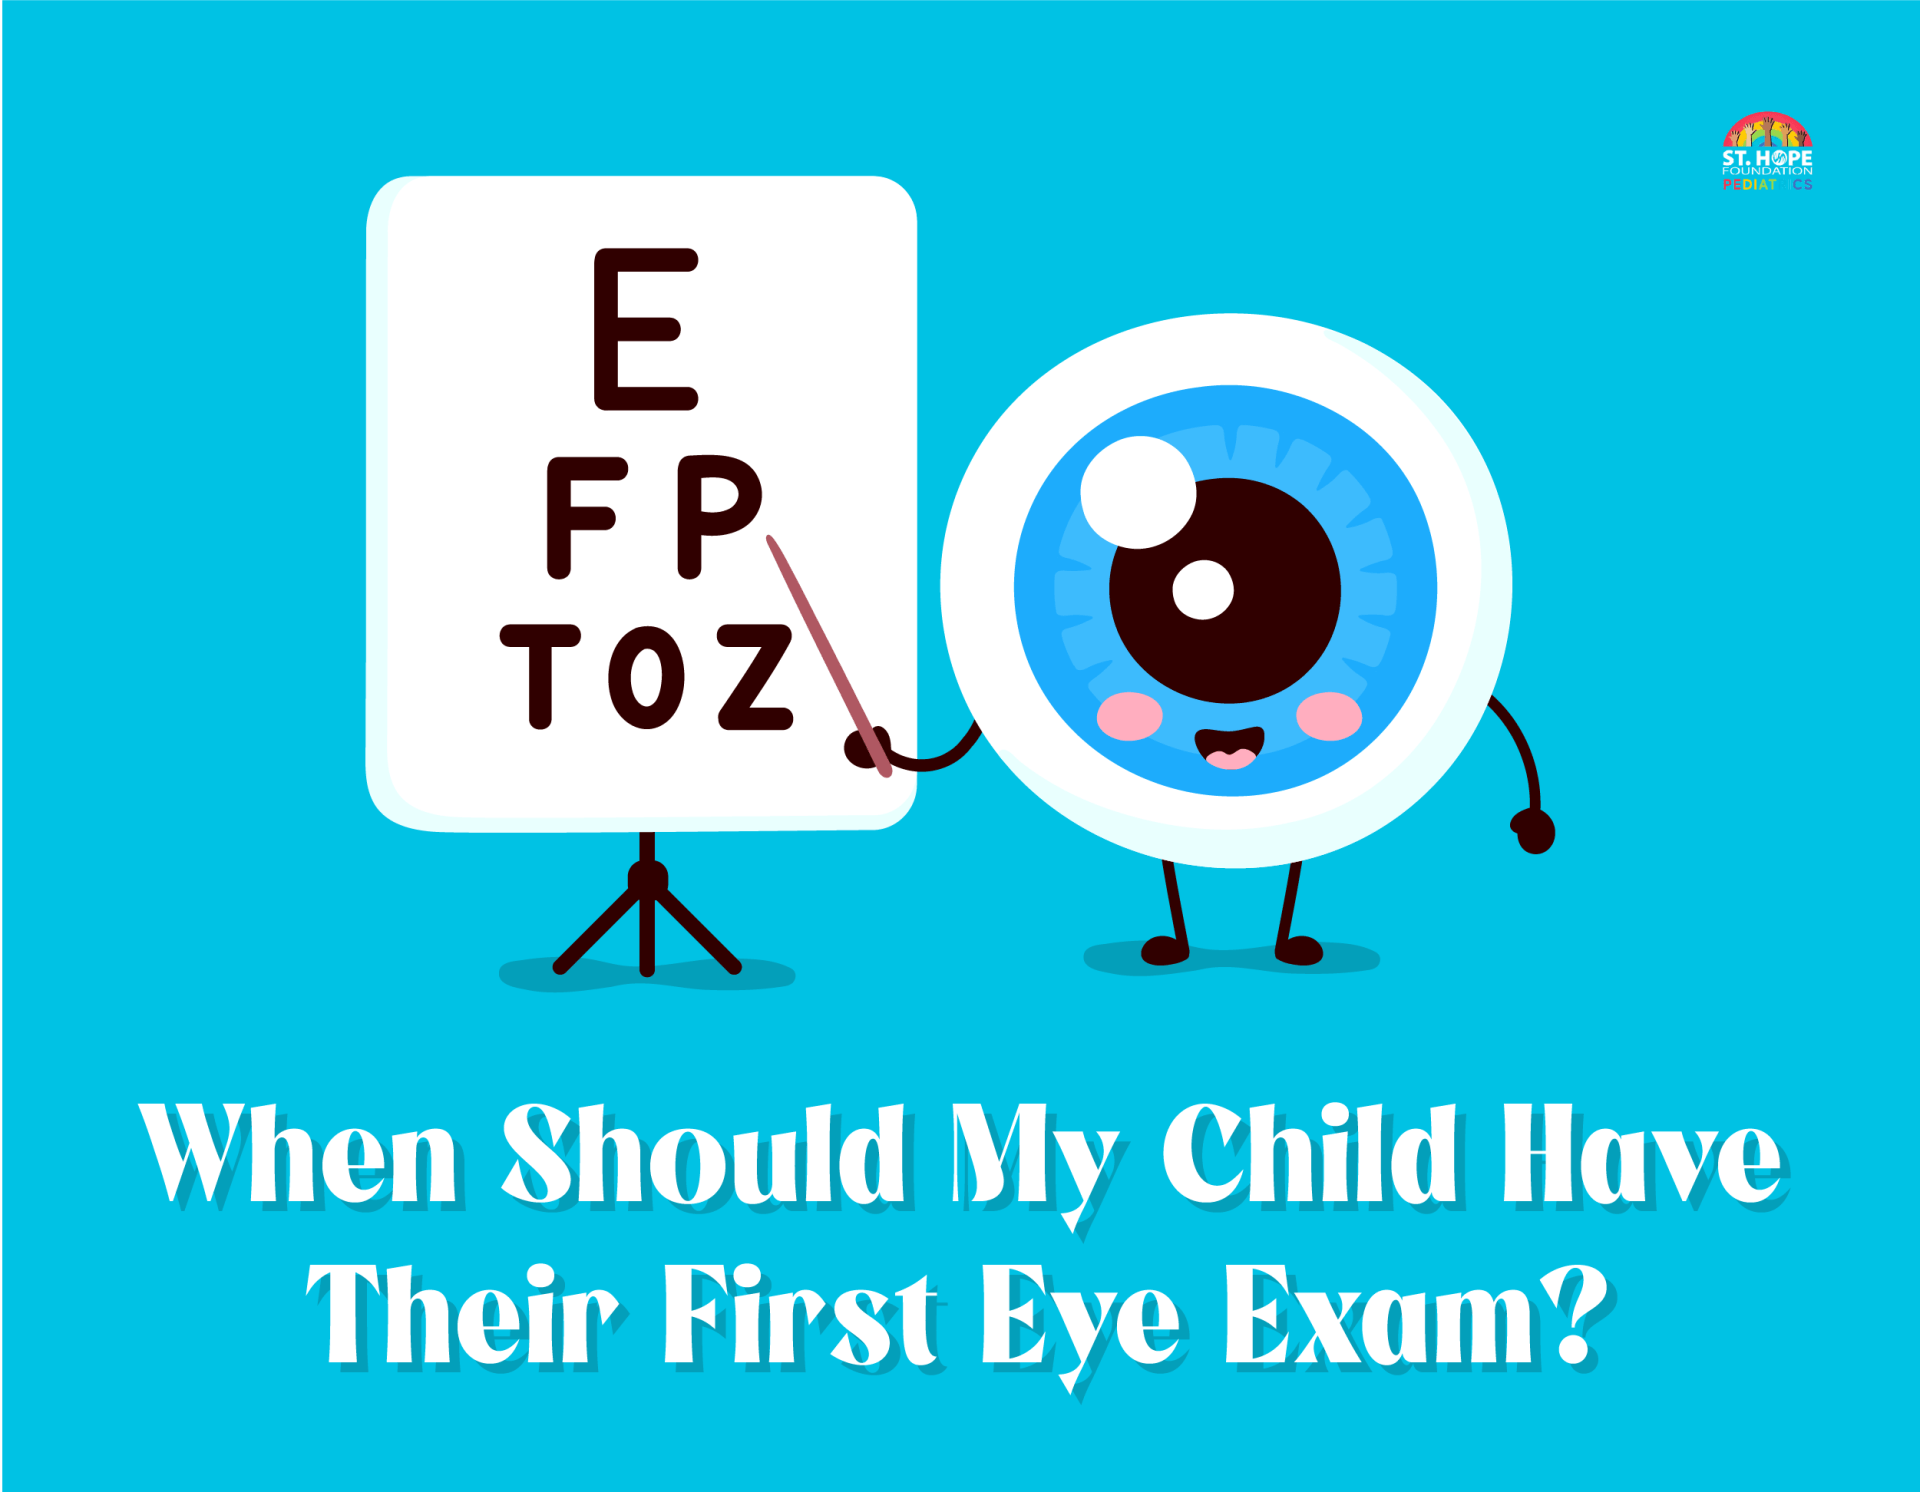 when should a child have an eye exam?